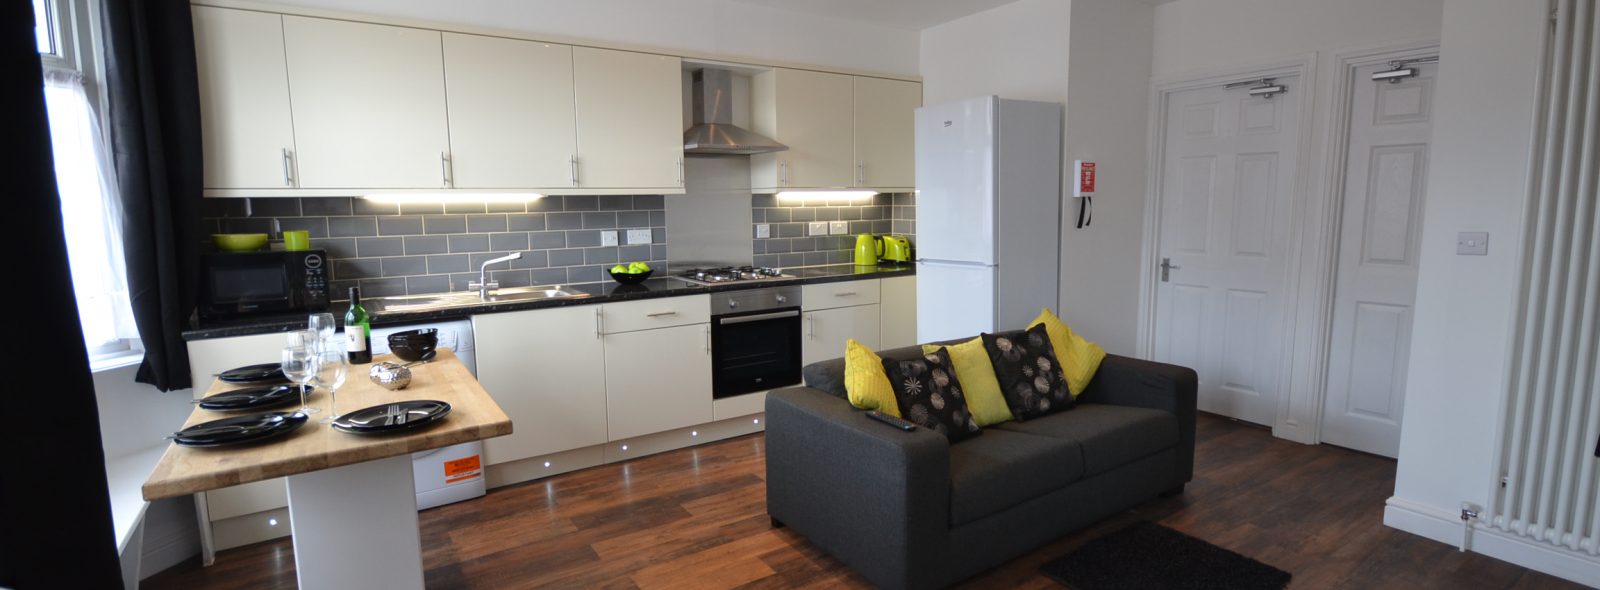 4-Bed Student House – Middle Street, Beeston